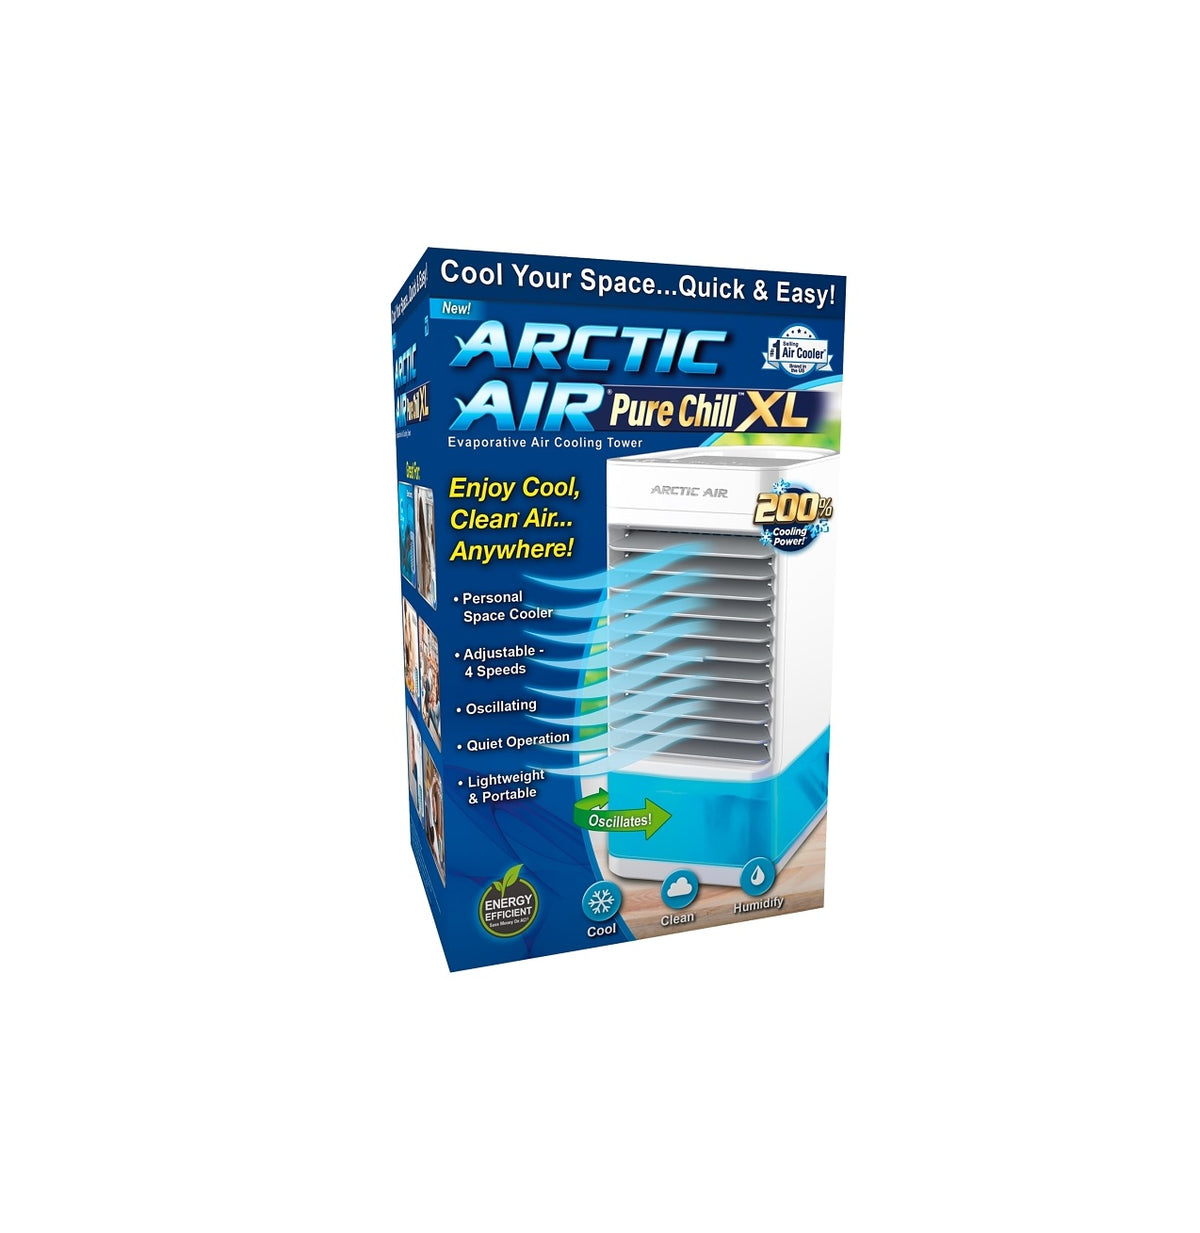 Arctic Air AAXLN-MC2 Pure Chill XL Series Air Cooling Tower, 4-Speed